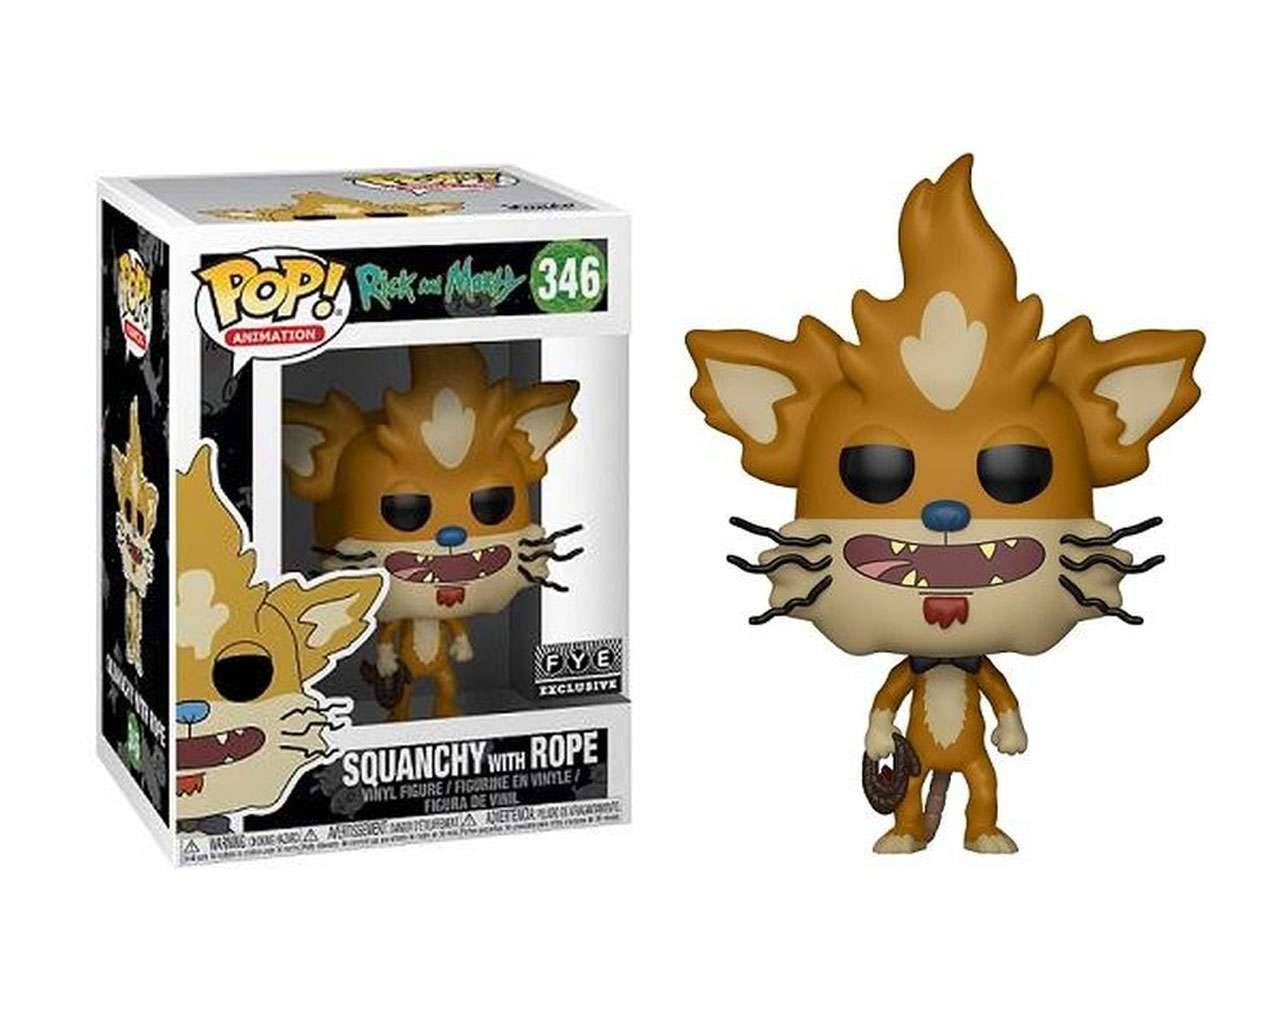 Squanchy with Rope Pop! Vinyl